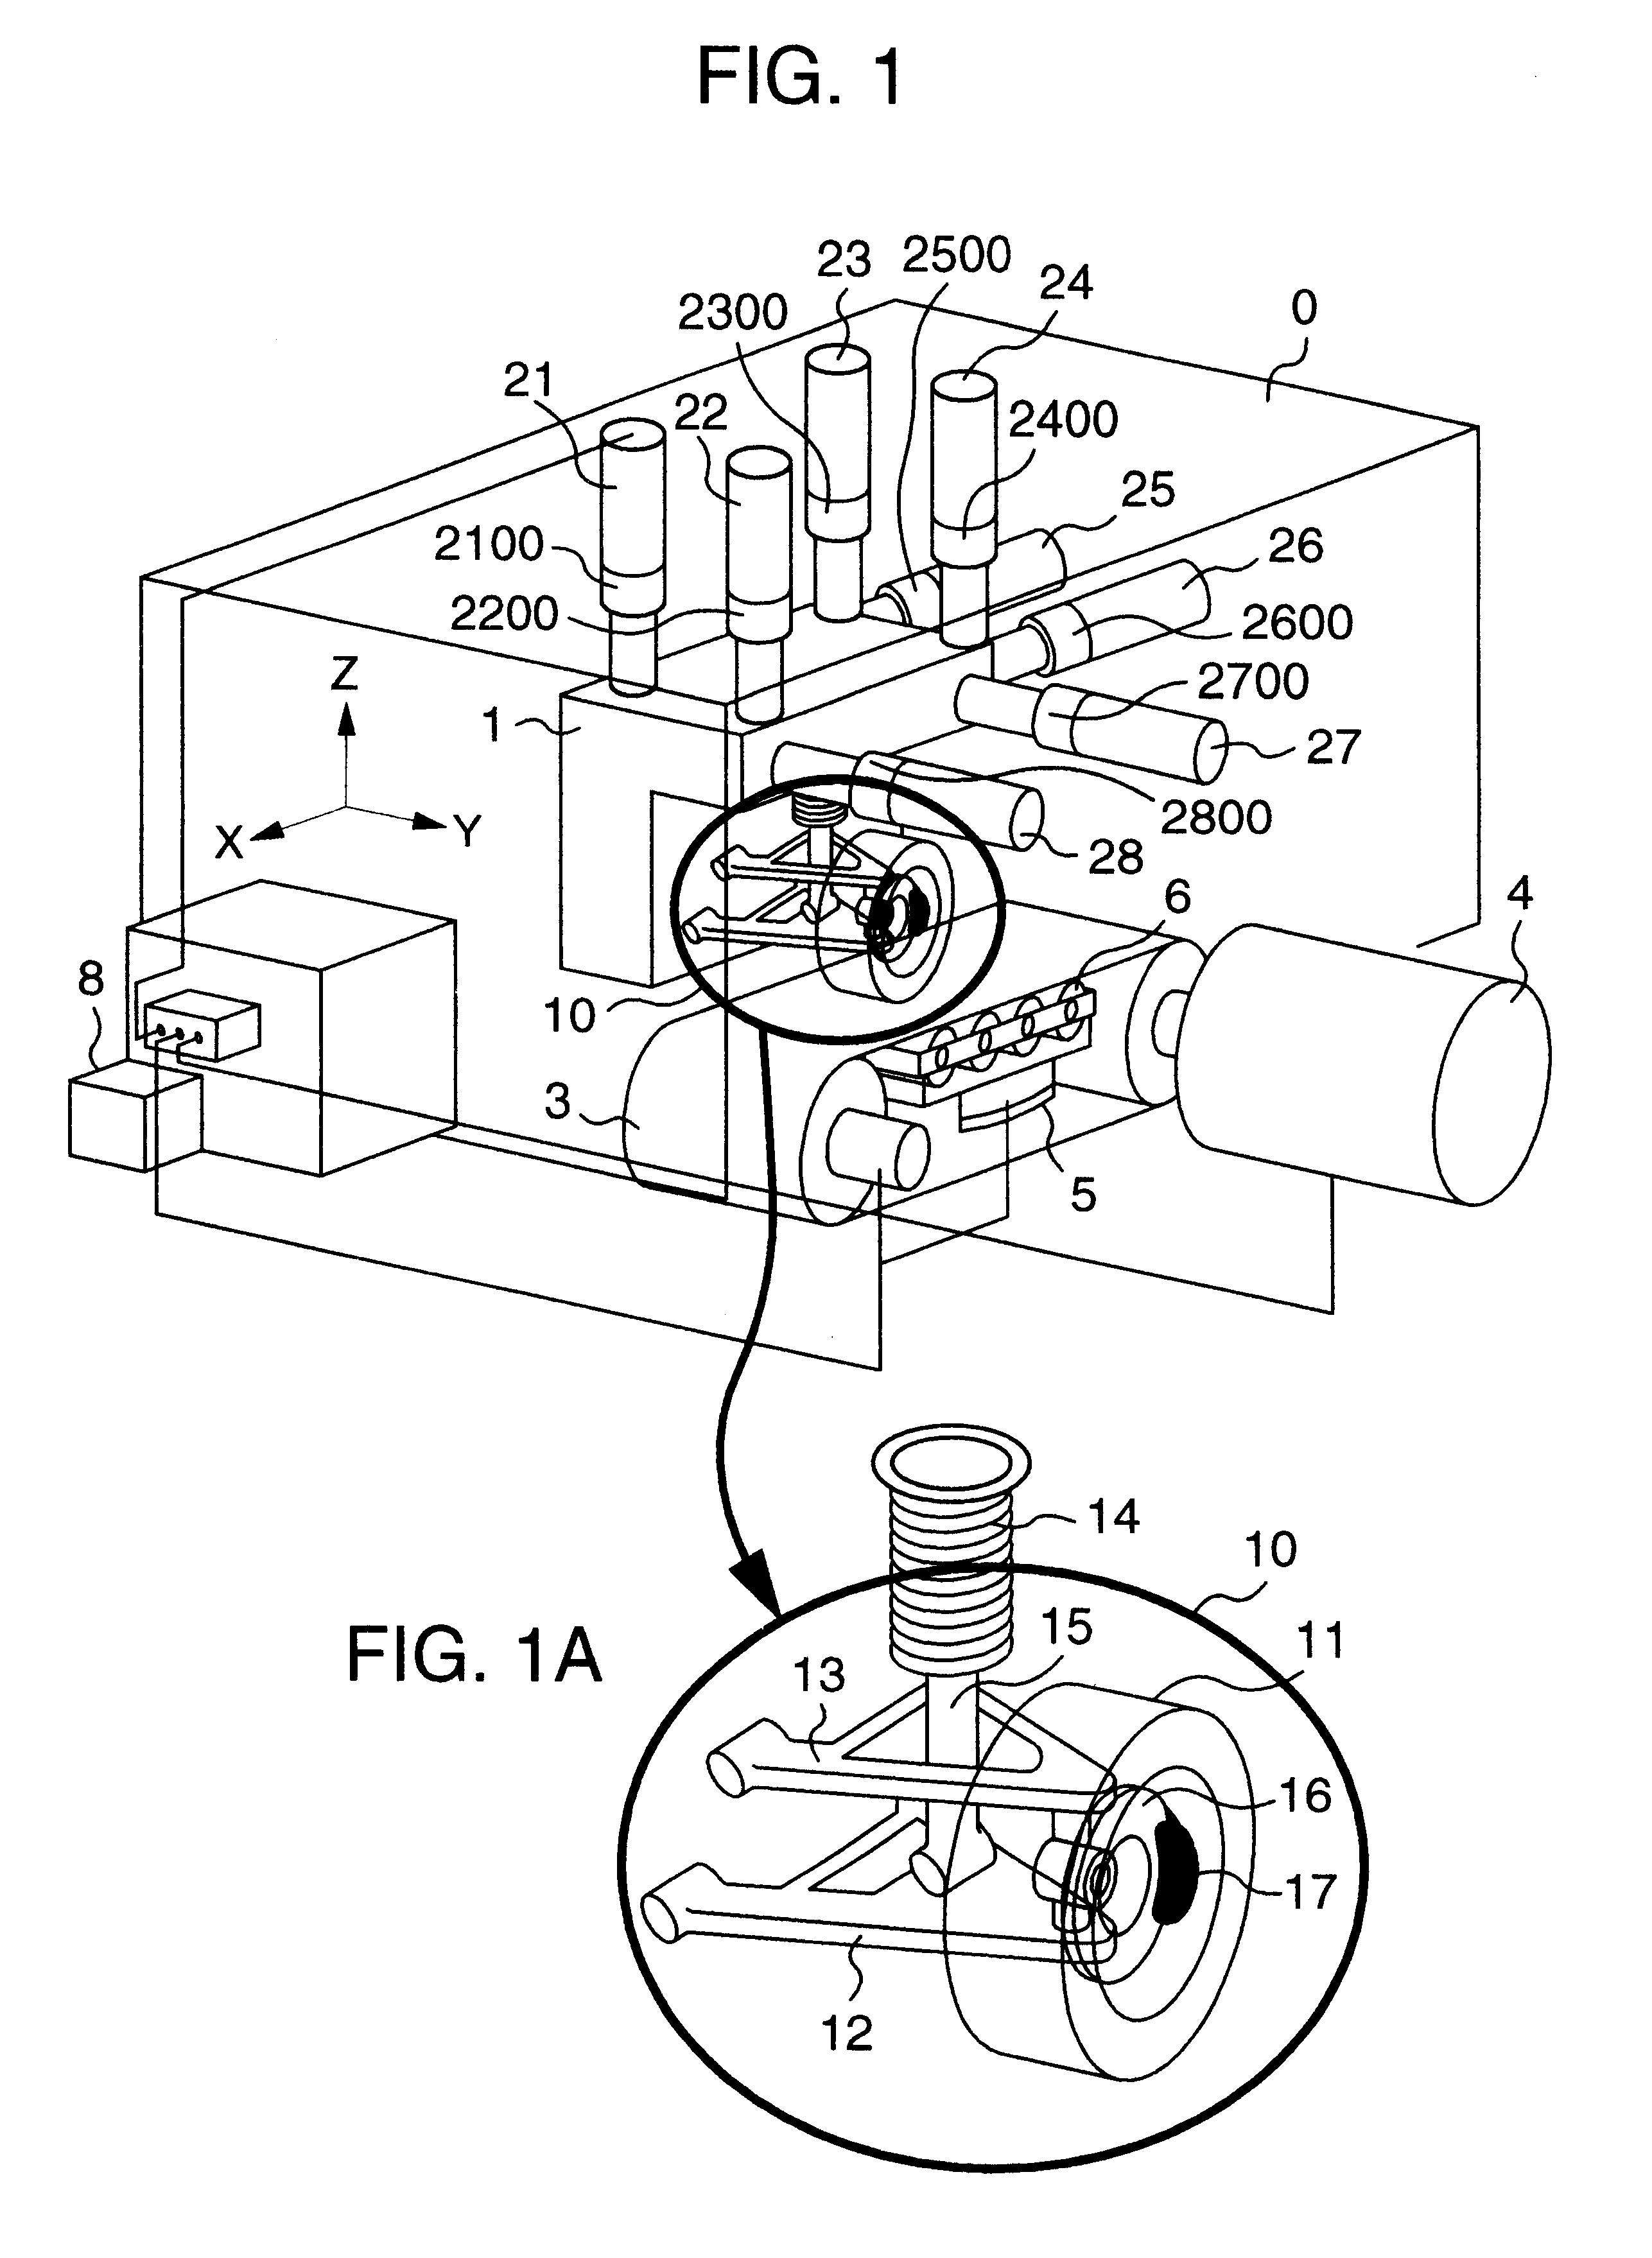 Apparatus for and method of testing dynamic characteristics of components of vehicle